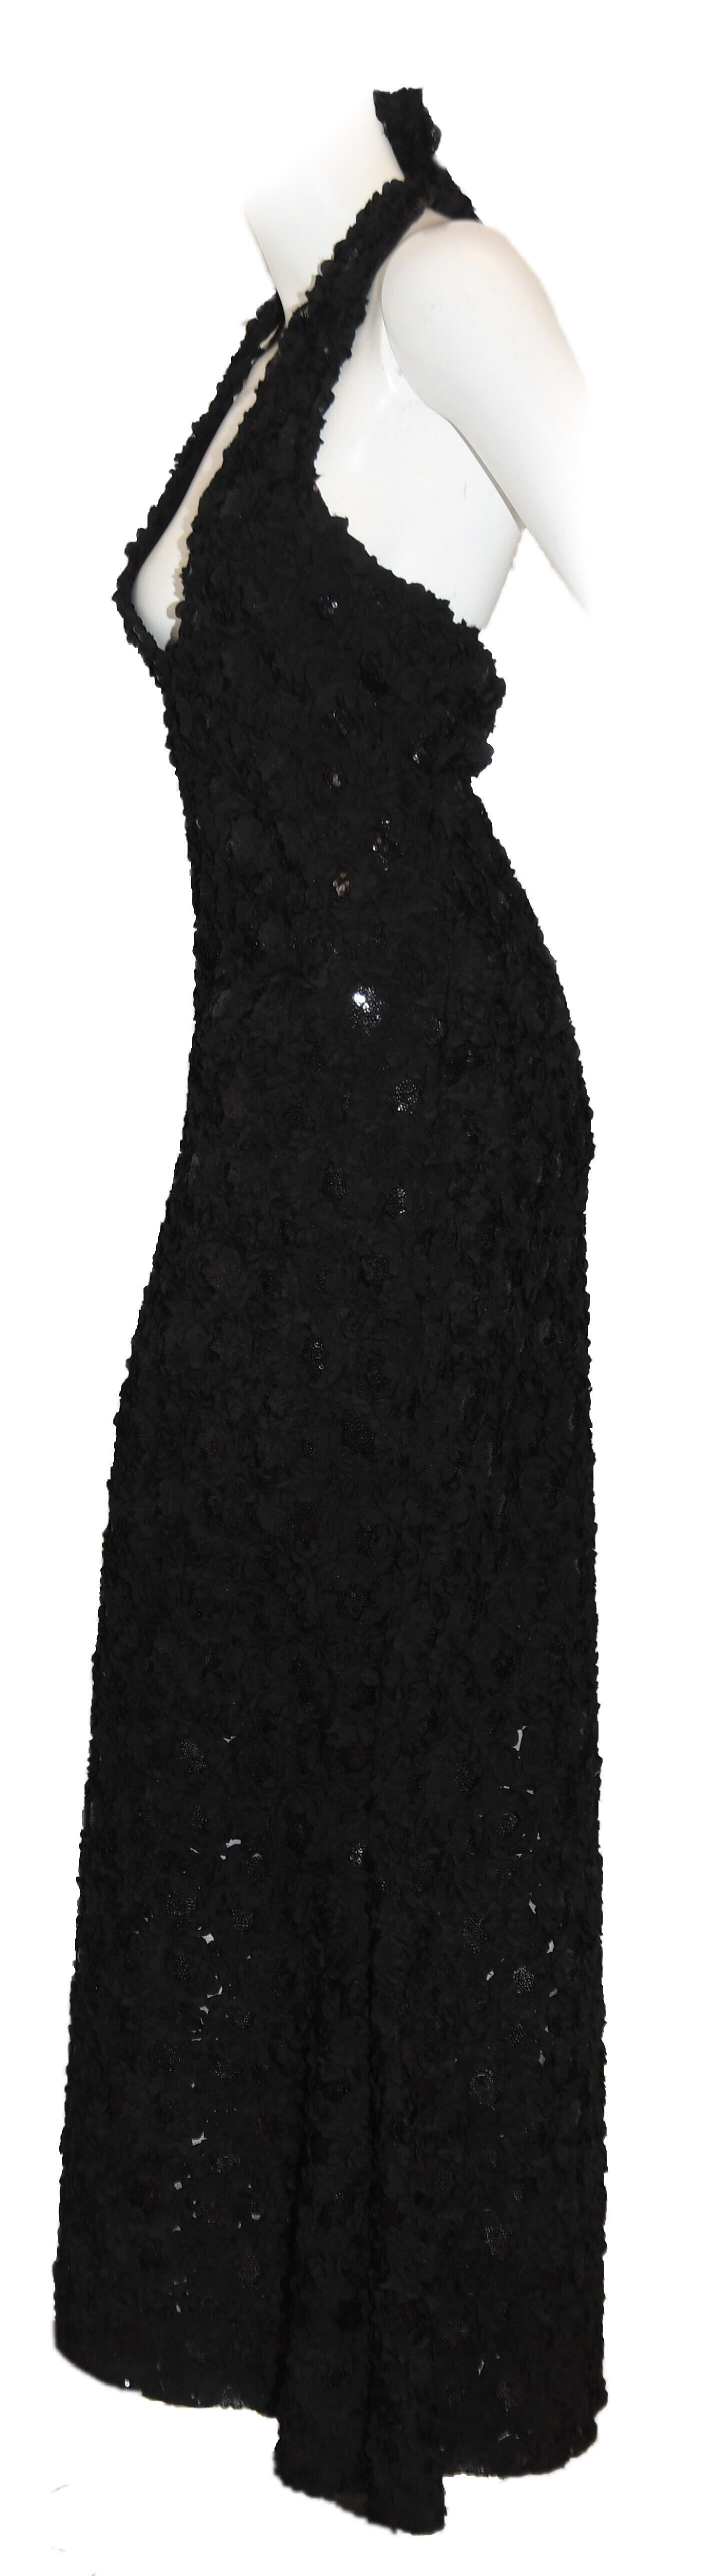 Carrie-Me Couture black halter dress contains two long sashes to be tied at the back in a bow or just a knot.  This dress includes mini fabric rosettes with sequined center throughout the entire dress. This dress is not lined.  As with the mermaid